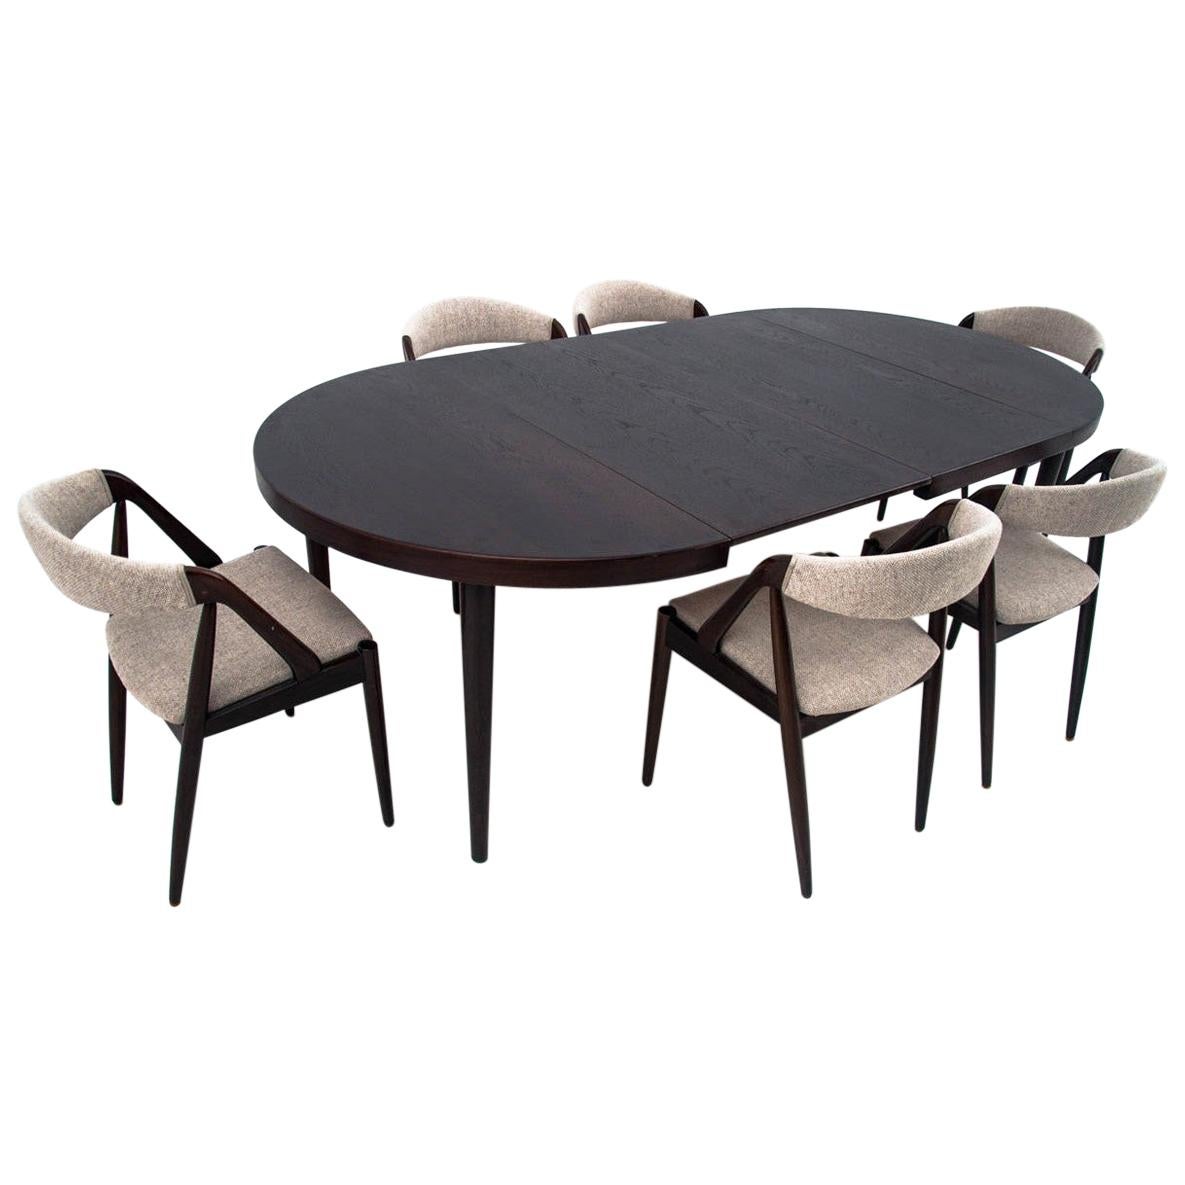 Table and 6 Chairs, Design by Kai Kristiansen, Danish Design, 1960s